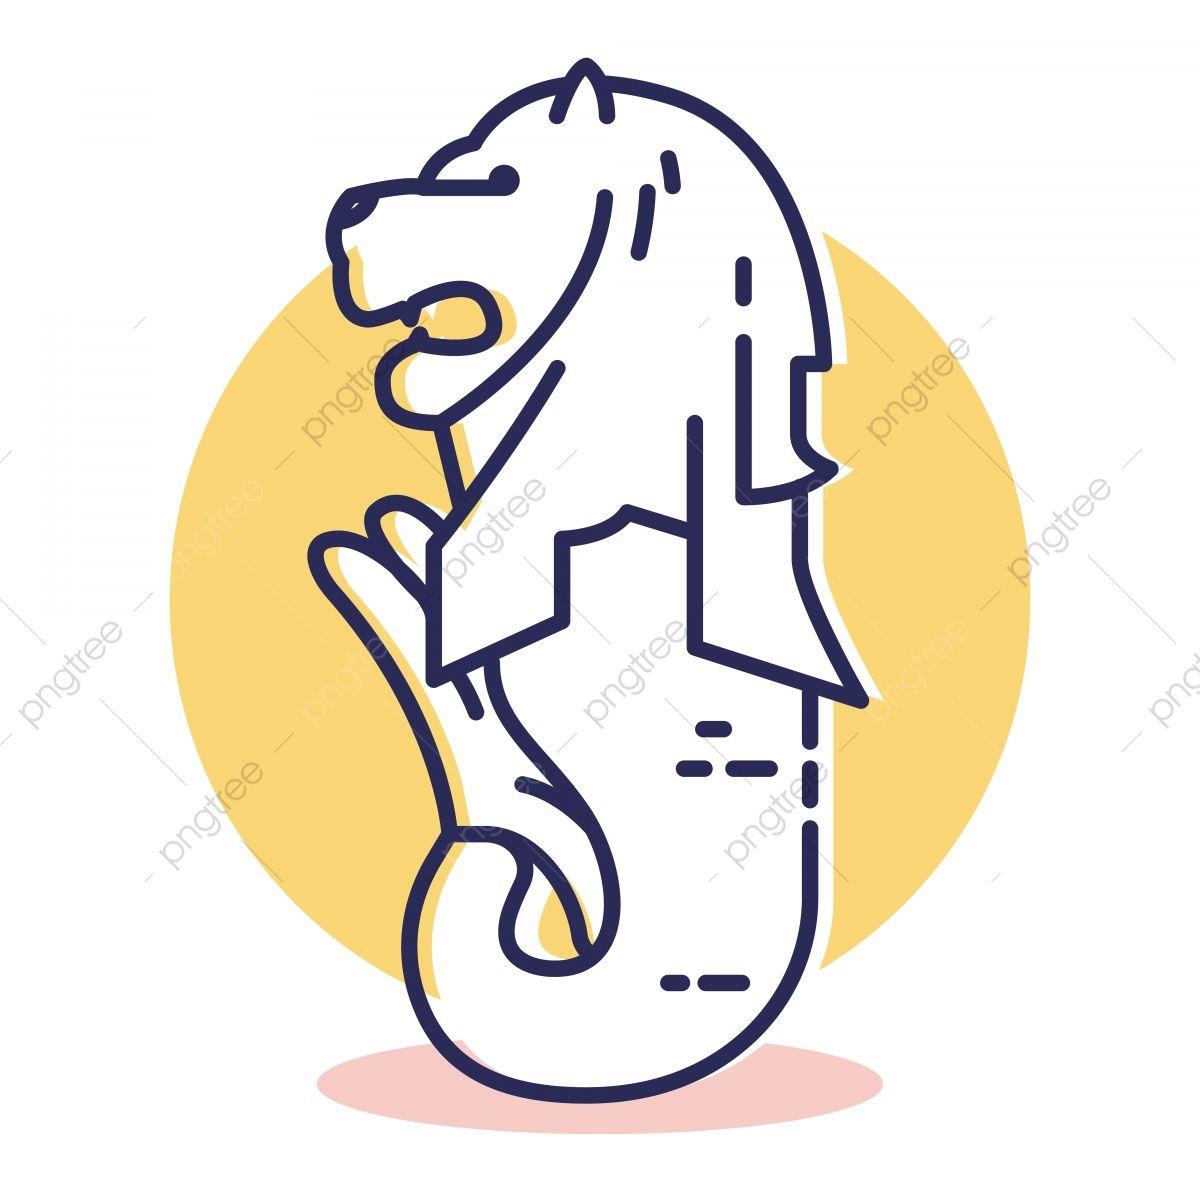 Merlion Logo - Travel And Destination Singapore Merlion Icon With Outline Style ...